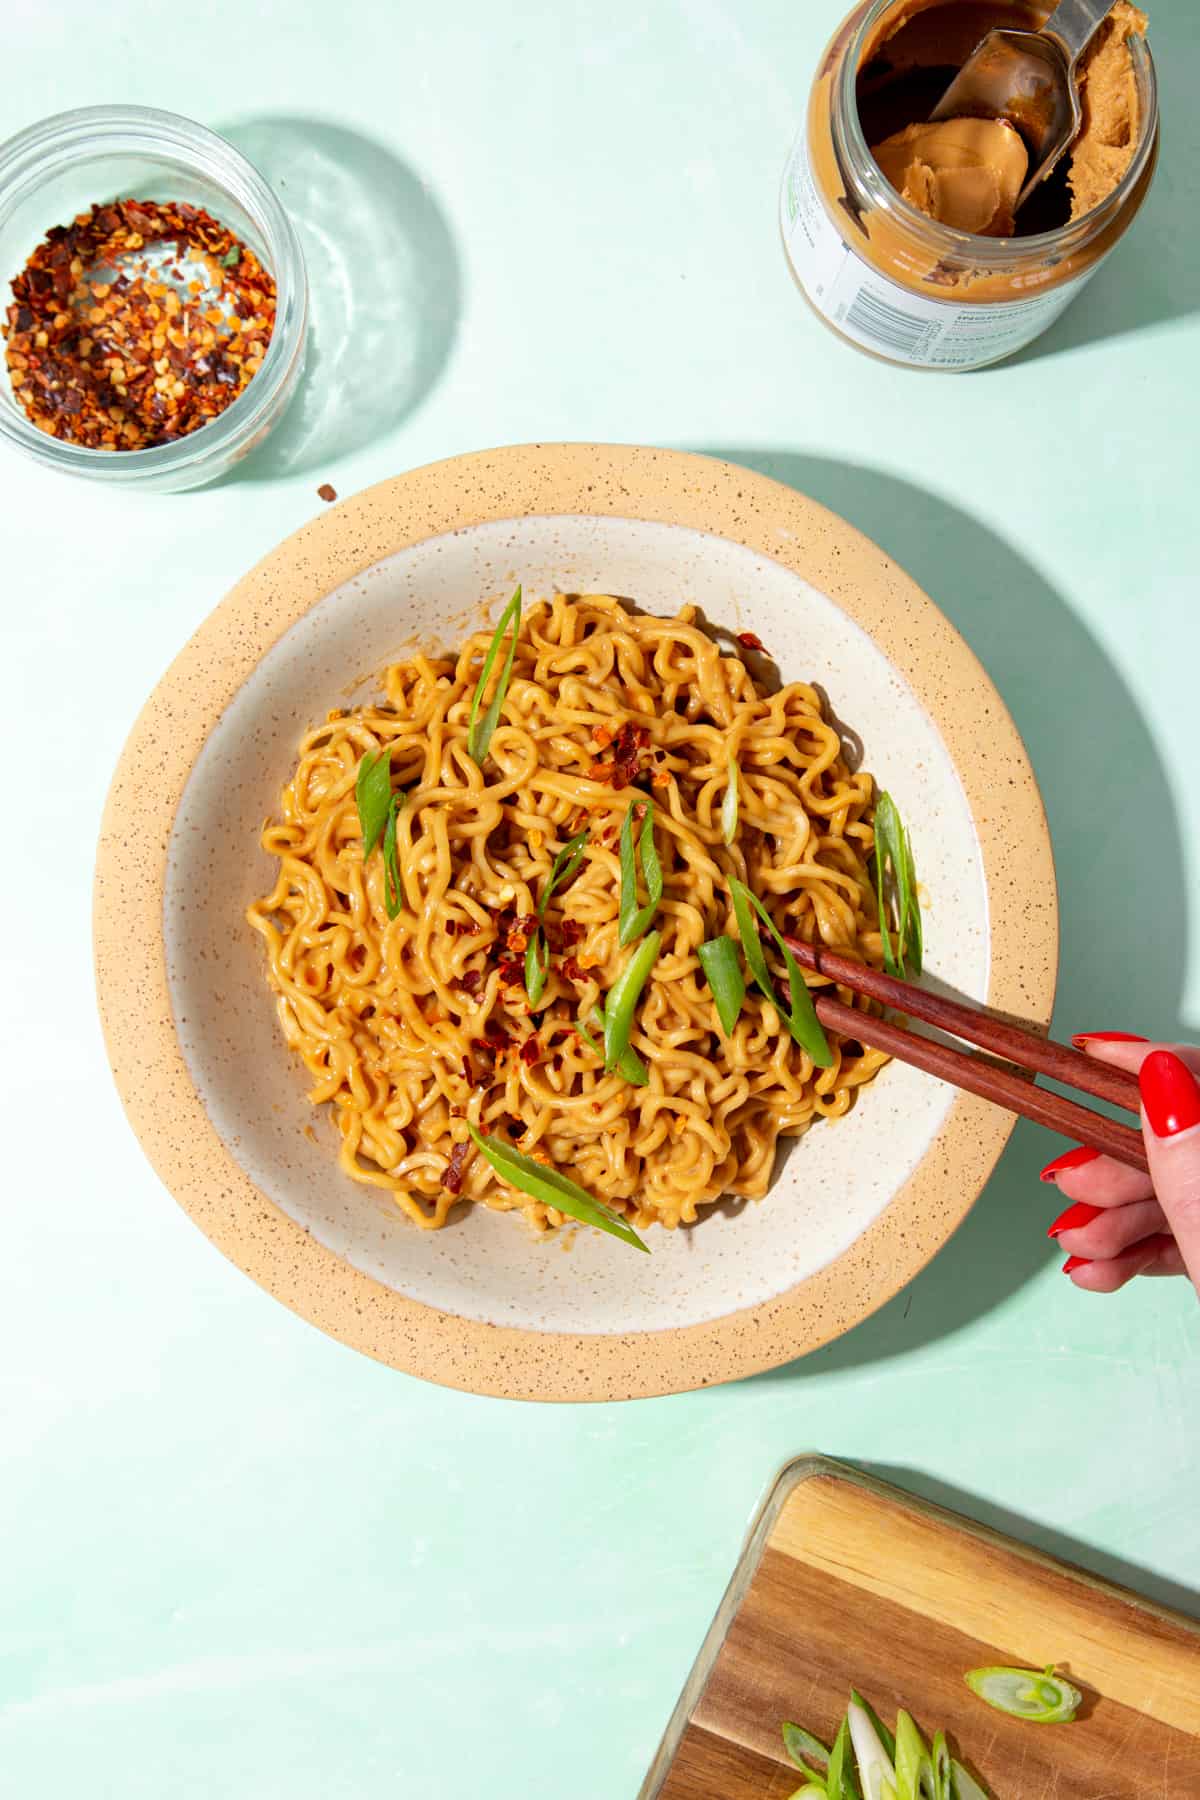 Noodles in a bowl with chop sticks and topped with slices of spring onion. Chilli flakes and peanut butter next to the bowl.